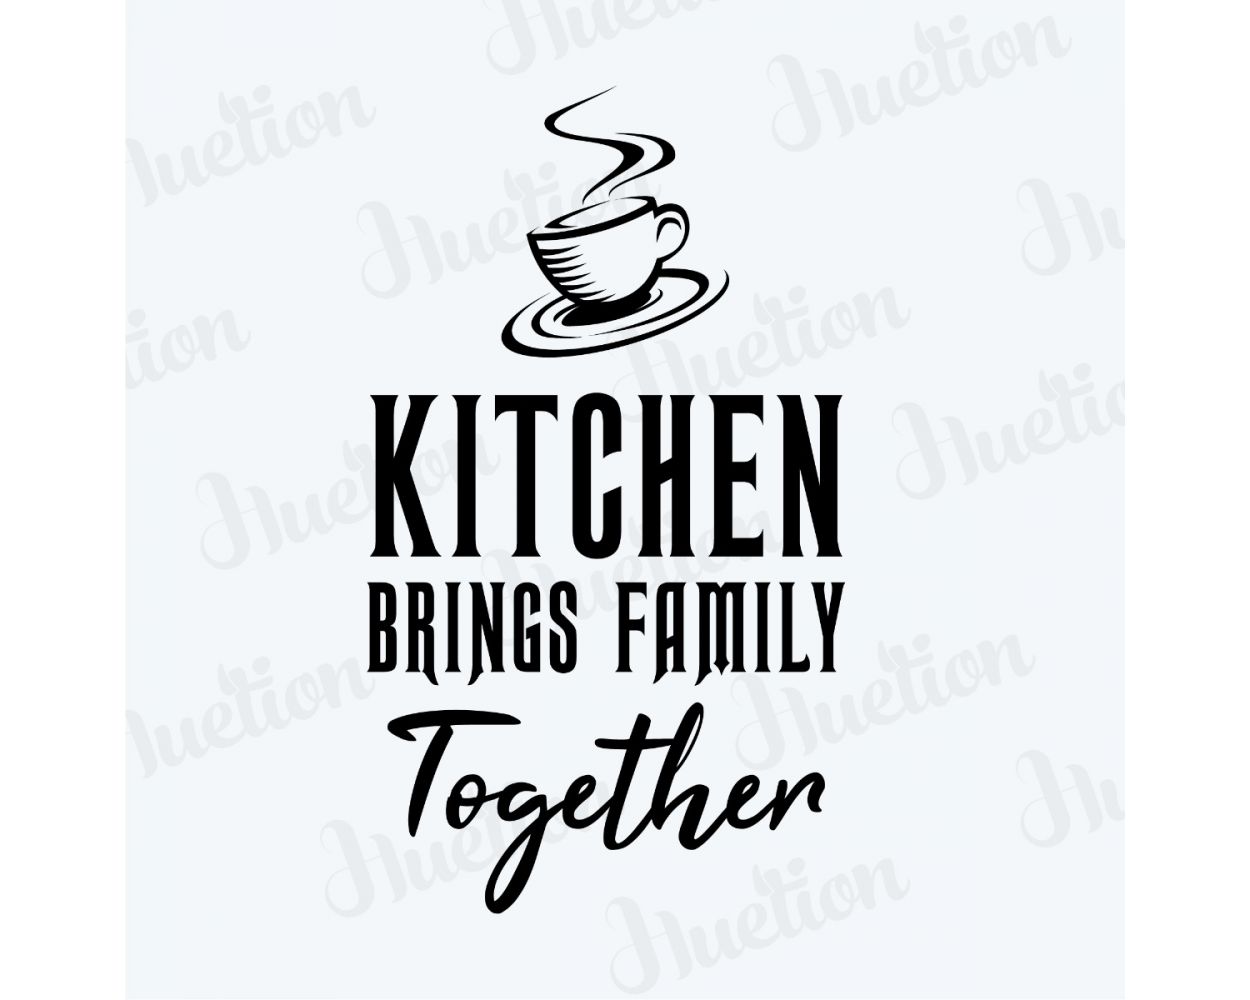 Best Kitchen Brings Family Together Quotes Kitchen Wall Stickers for Kitchen Wall decor. shop now